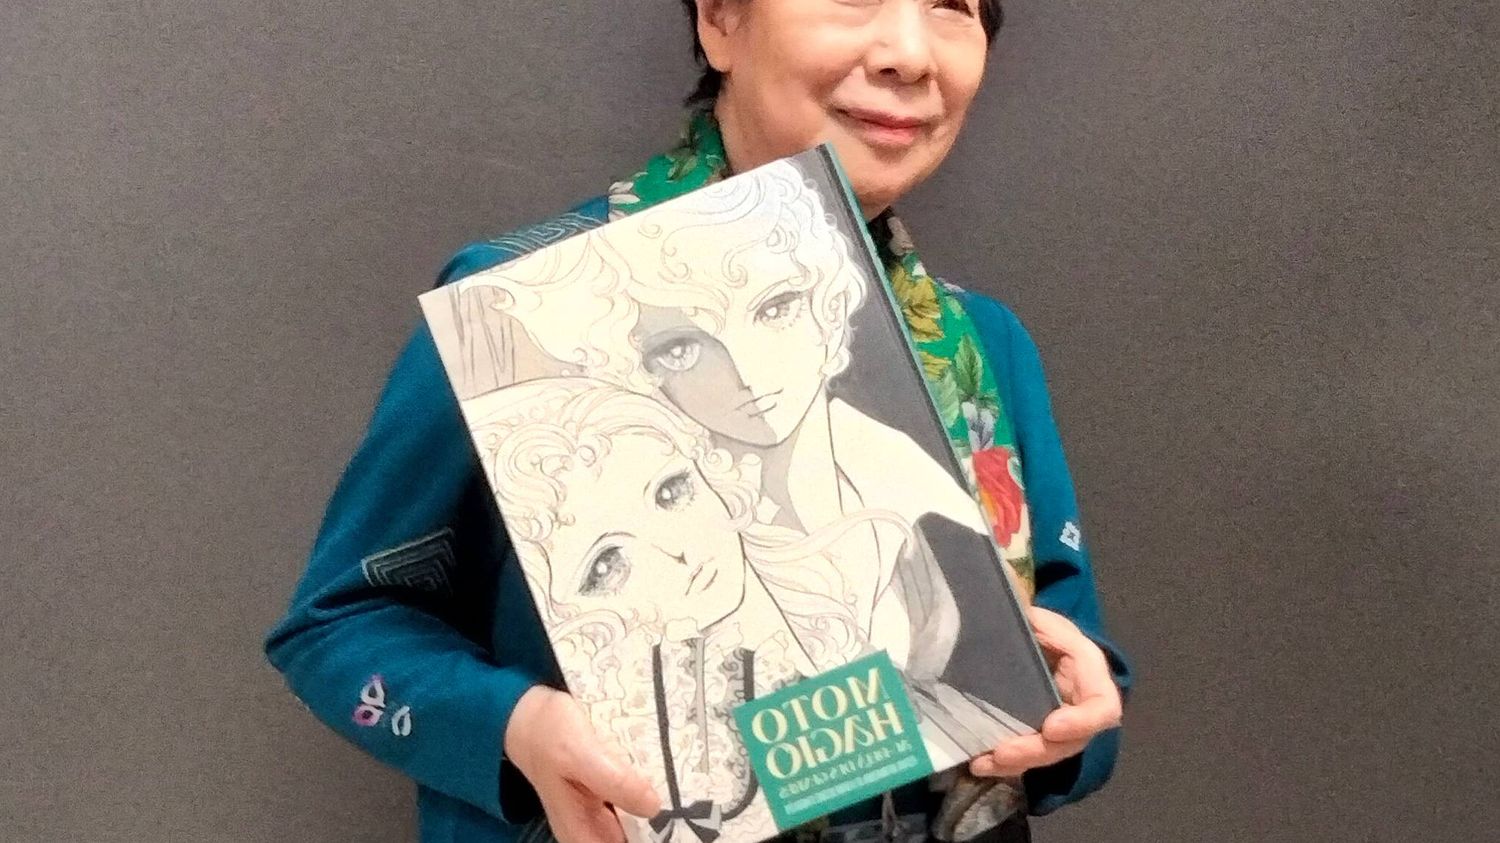 INTERVIEW.  Motto Hagio: “I'm too bothered by the writing” unequal manga between men and women